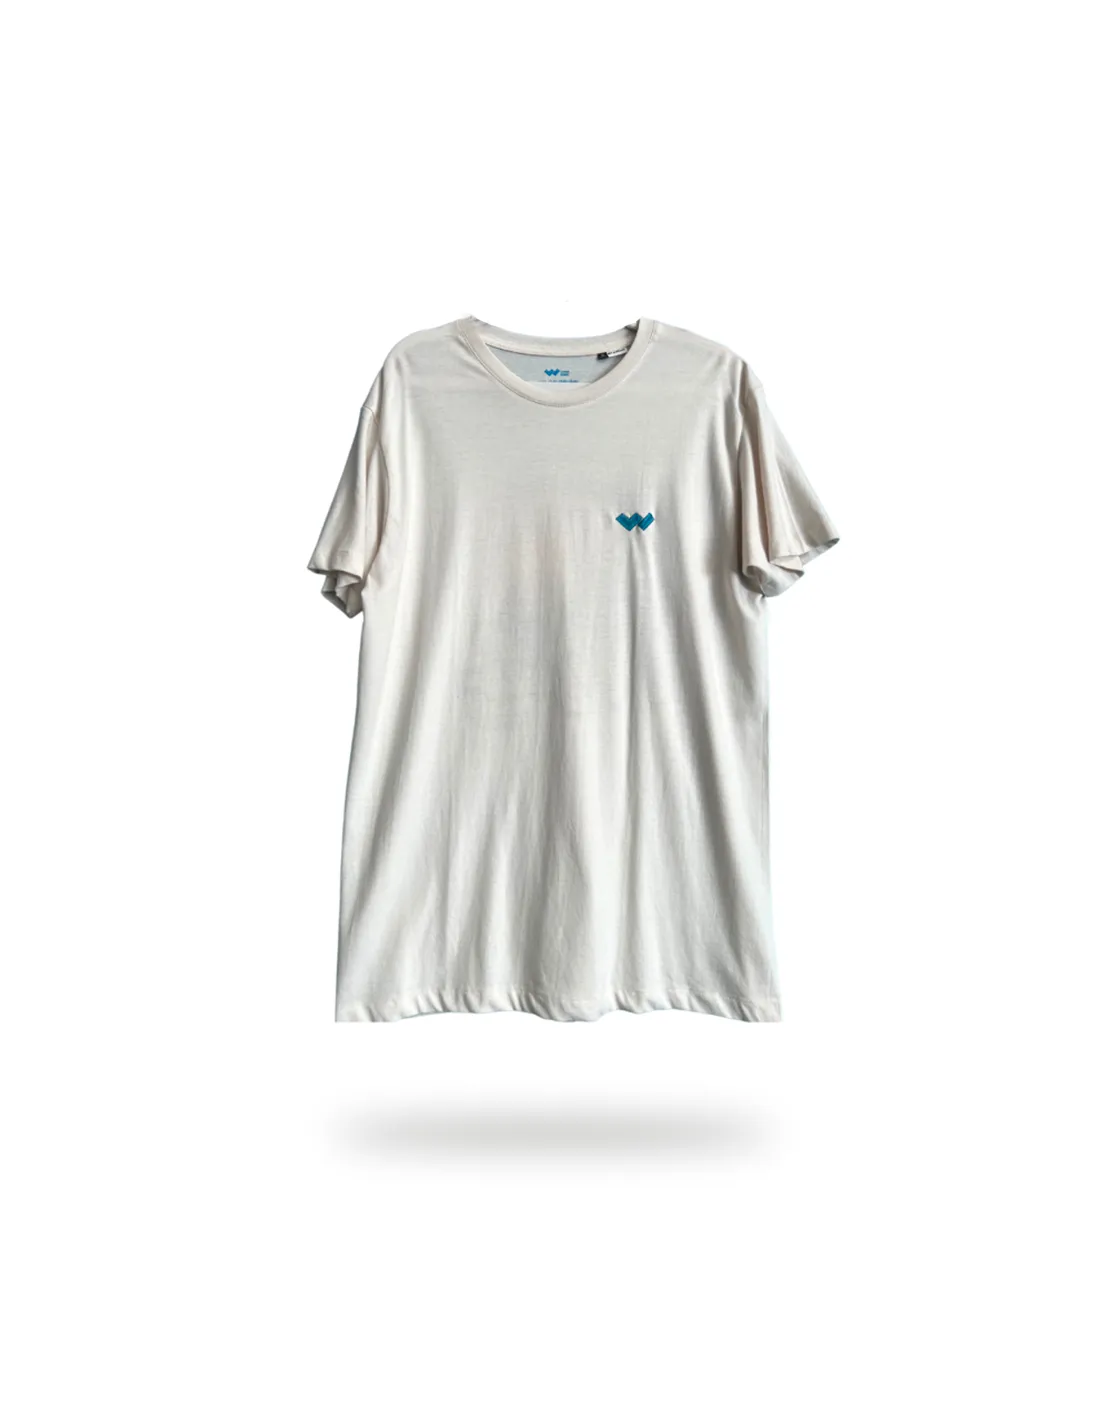 Long Wave Unisex T-shirt - The long wave of Nazare